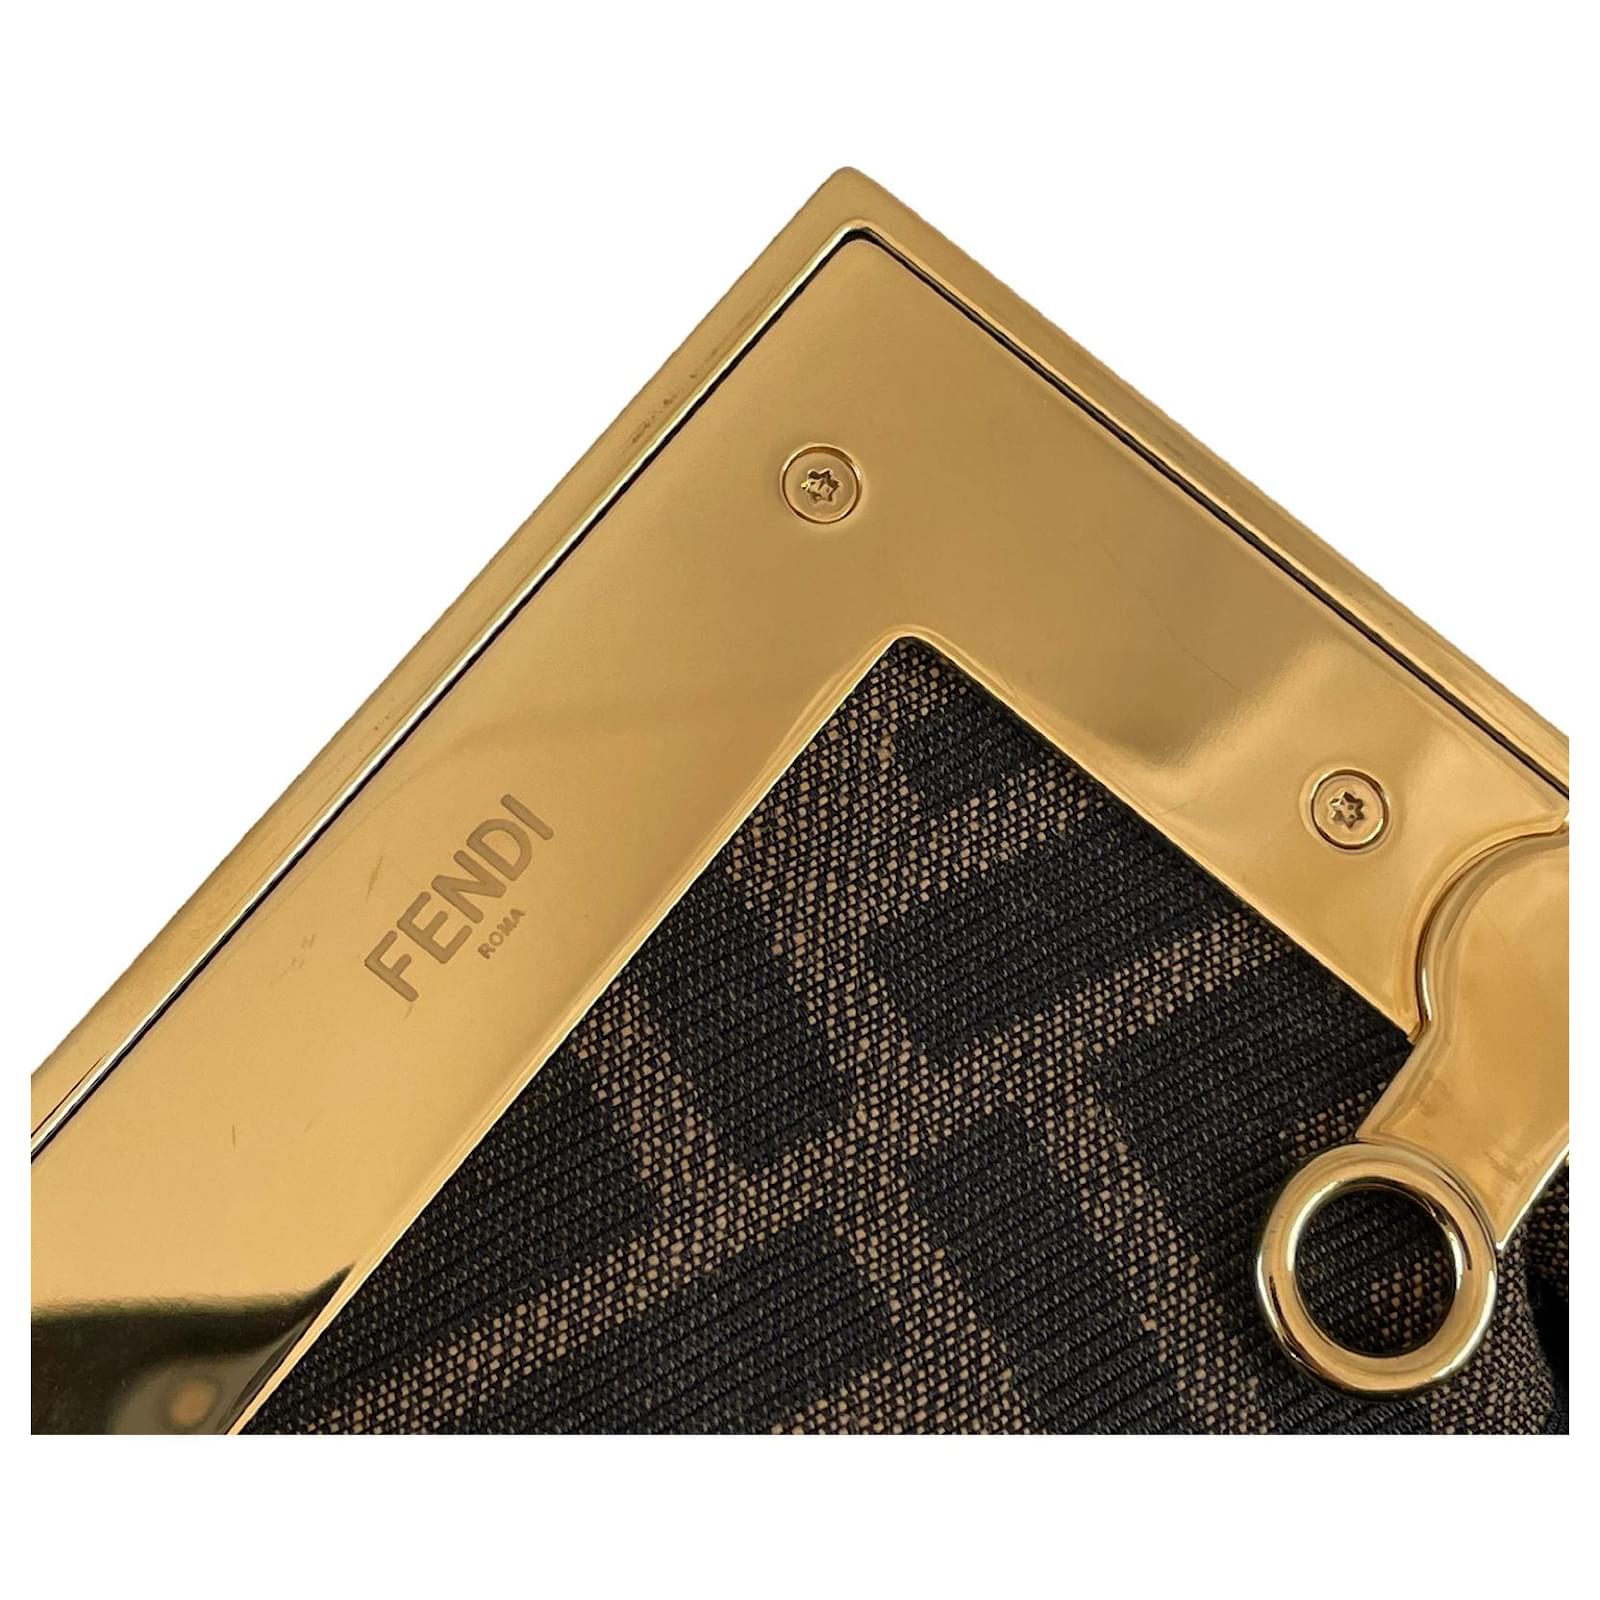 Fendi First Bag Shearling Small - ShopStyle Clutches